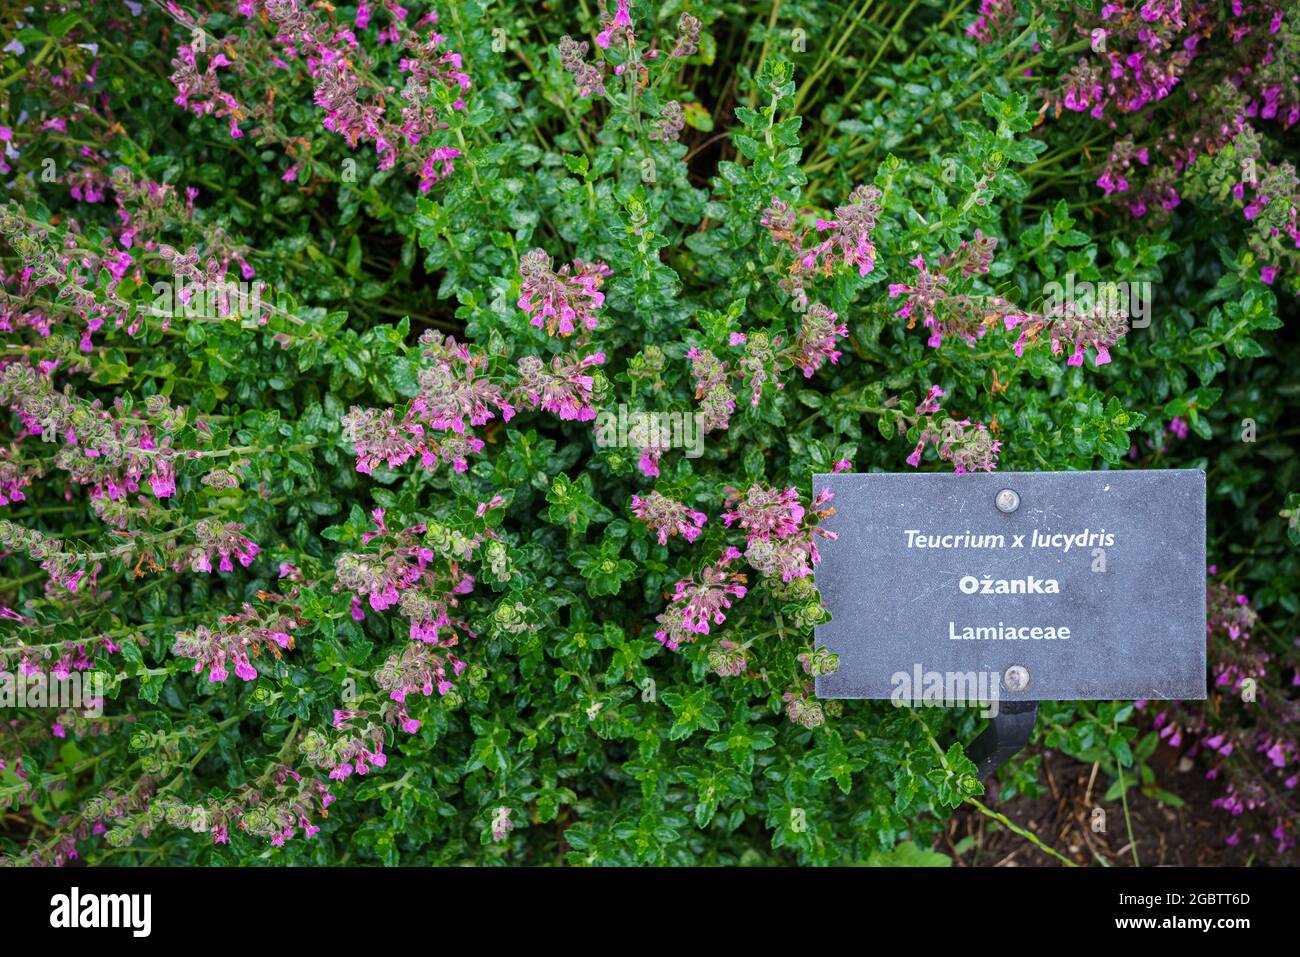 Teucrium lucydris plants, pink inflorescence. Medicinal herb. Stock Photo